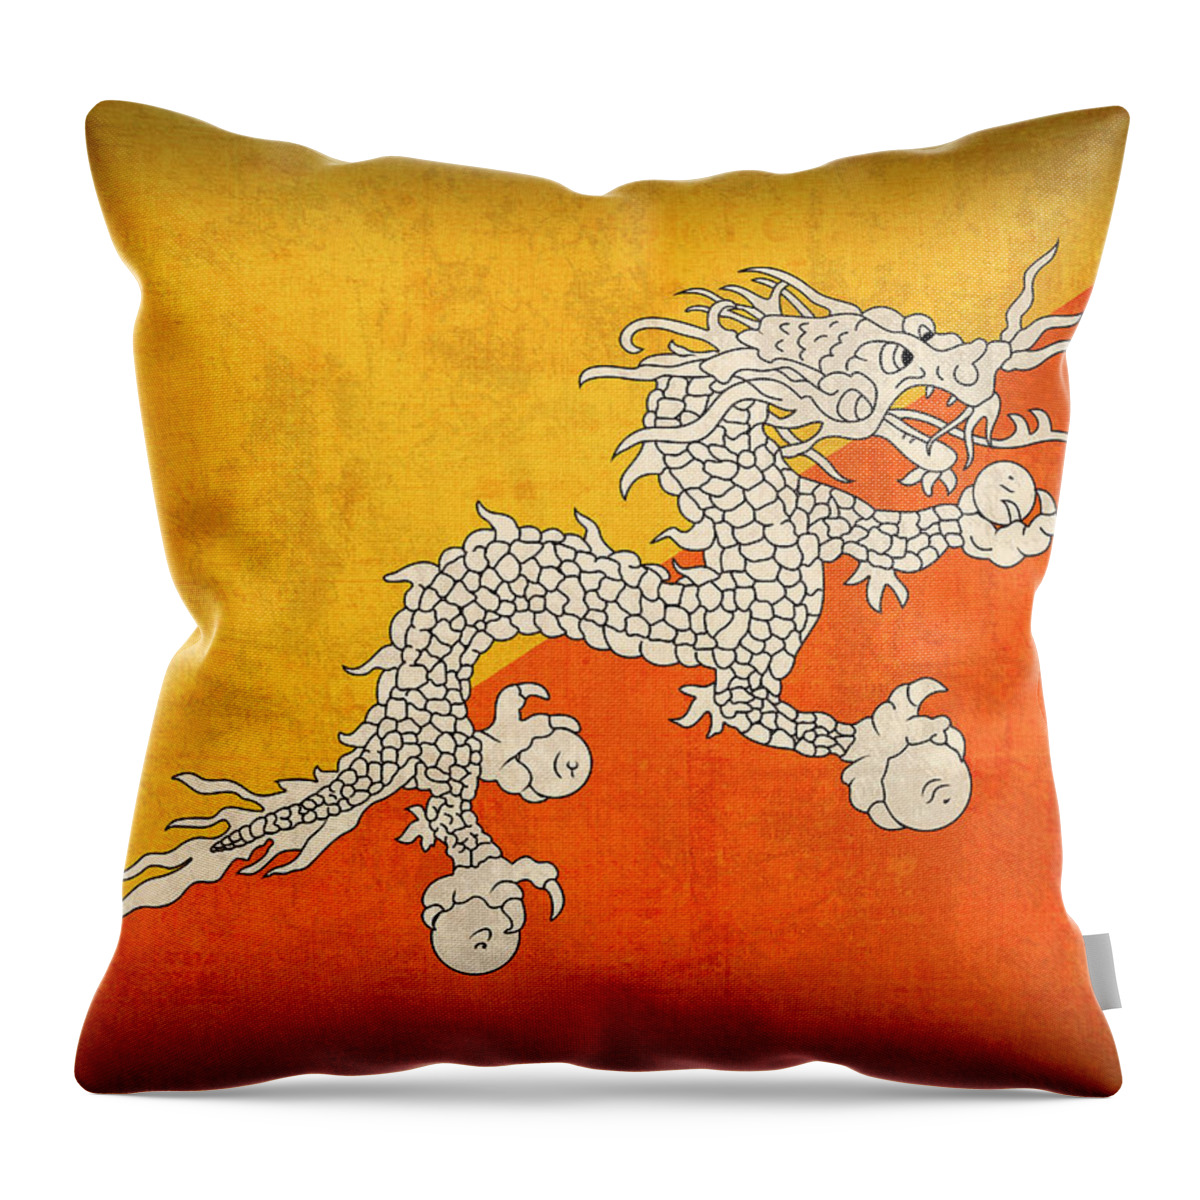 Bhutan Throw Pillow featuring the mixed media Bhutan Flag Vintage Distressed Finish by Design Turnpike